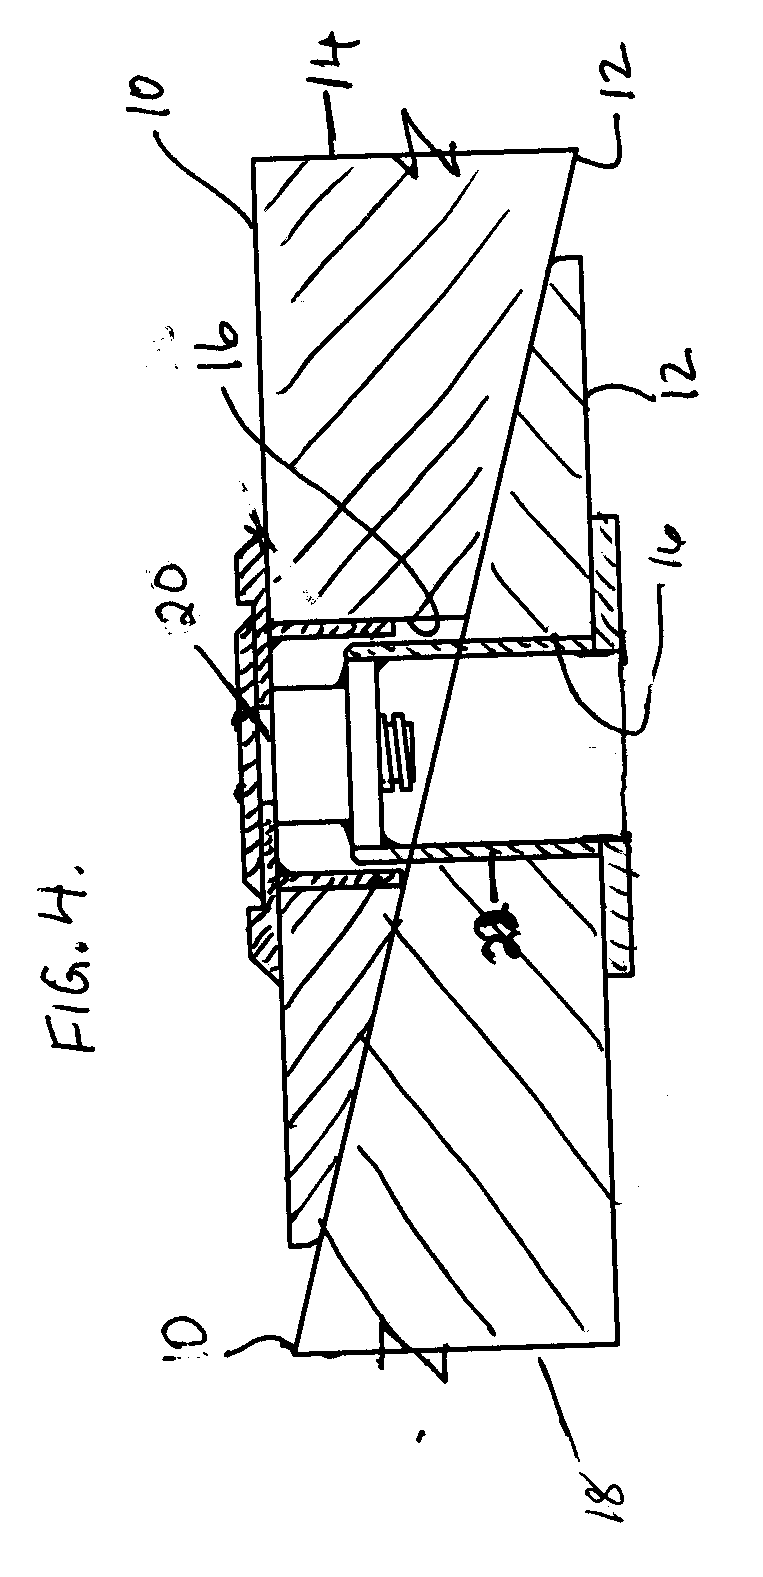 Interlocking honeycomb-cored panel system for construction of load supporting surfaces